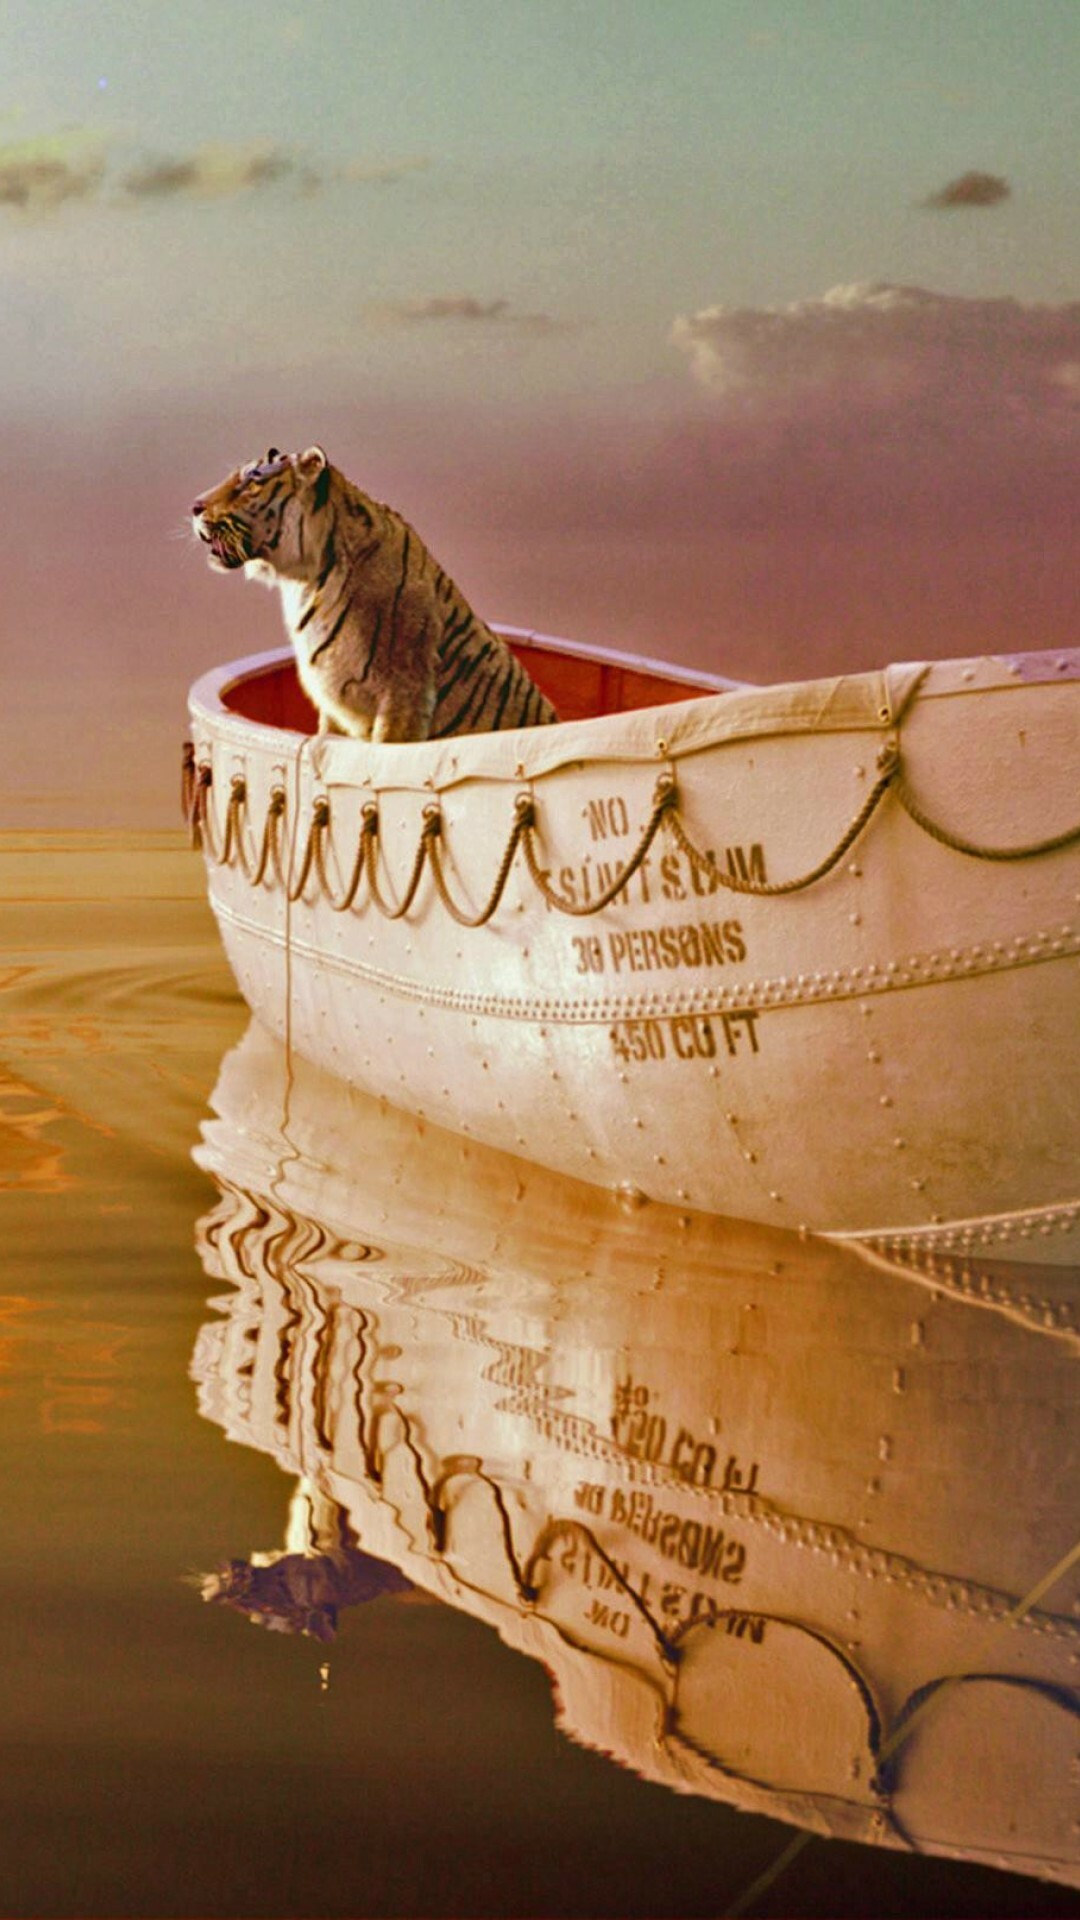 Life of Pi: An exceptional story of survival, Screenplay by David Magee. 1080x1920 Full HD Wallpaper.